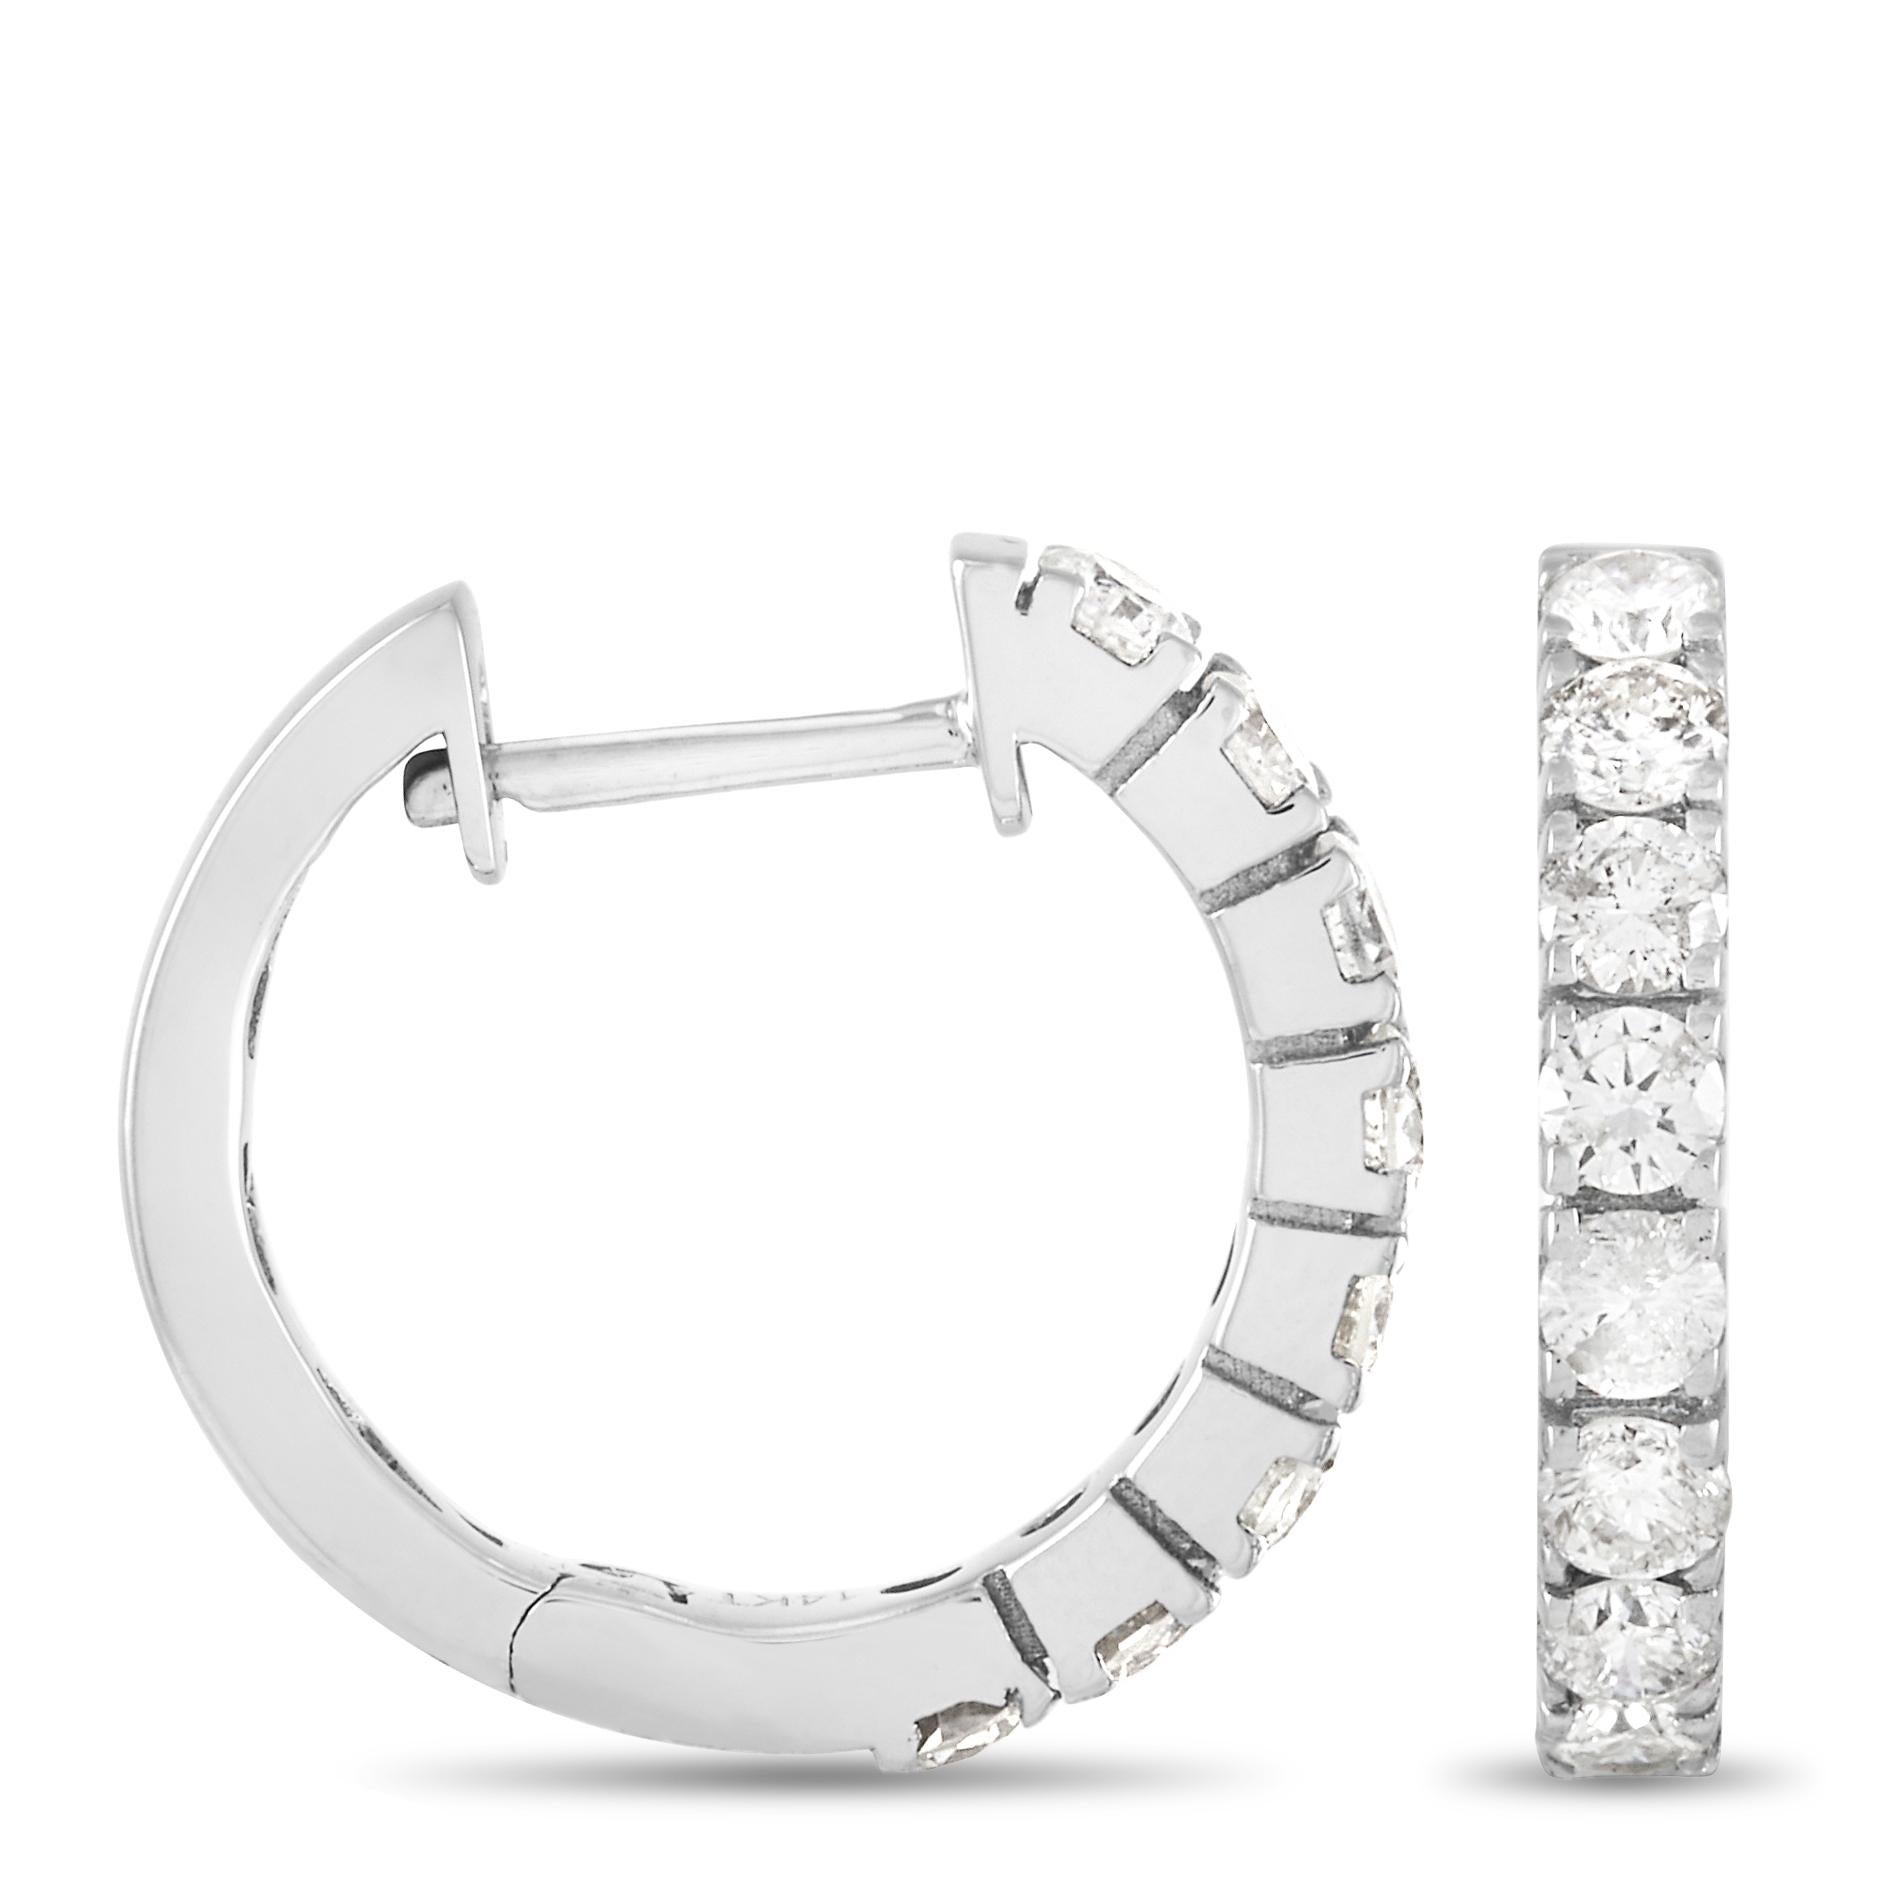 On this classic design, glittering diamonds and shimmering 14K White Gold come together to create a breathtaking pair of hoop earrings. These earrings shine to life thanks to the series of inset, round-cut diamonds with a total weight of 0.83